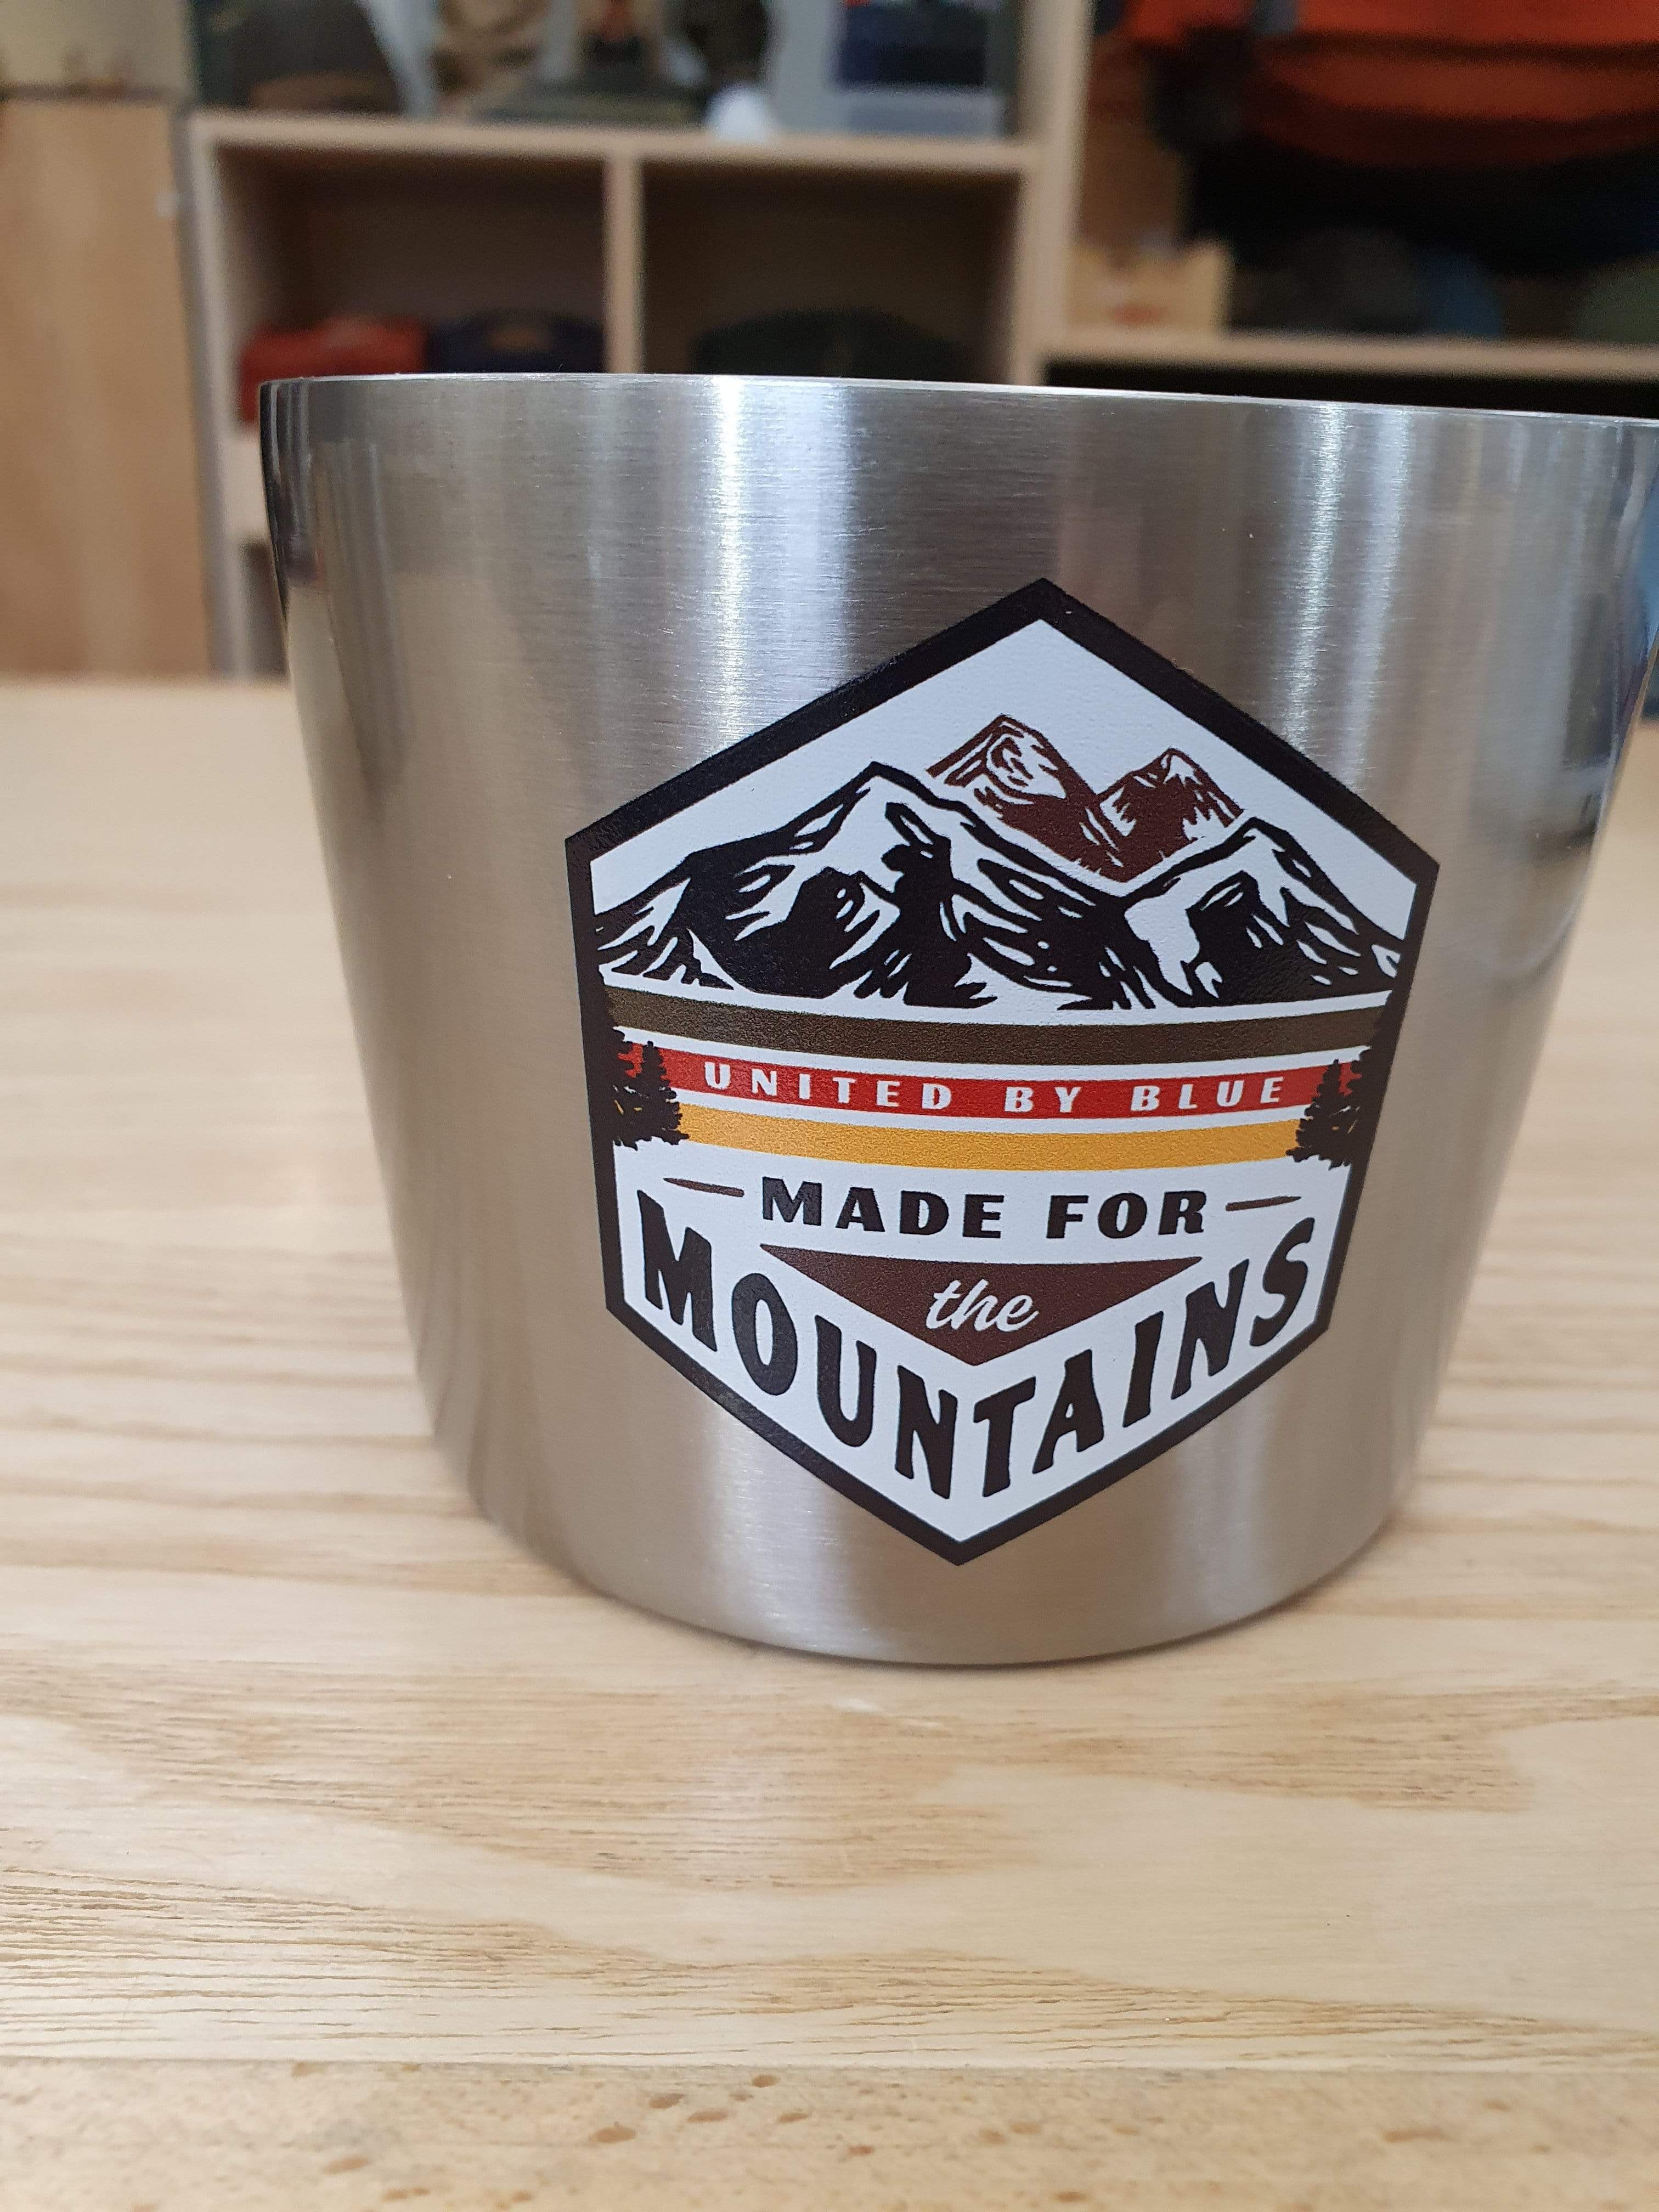 United By Blue Mug The Mountans United By Blue Insulated Steel Convertible Mug 12oz